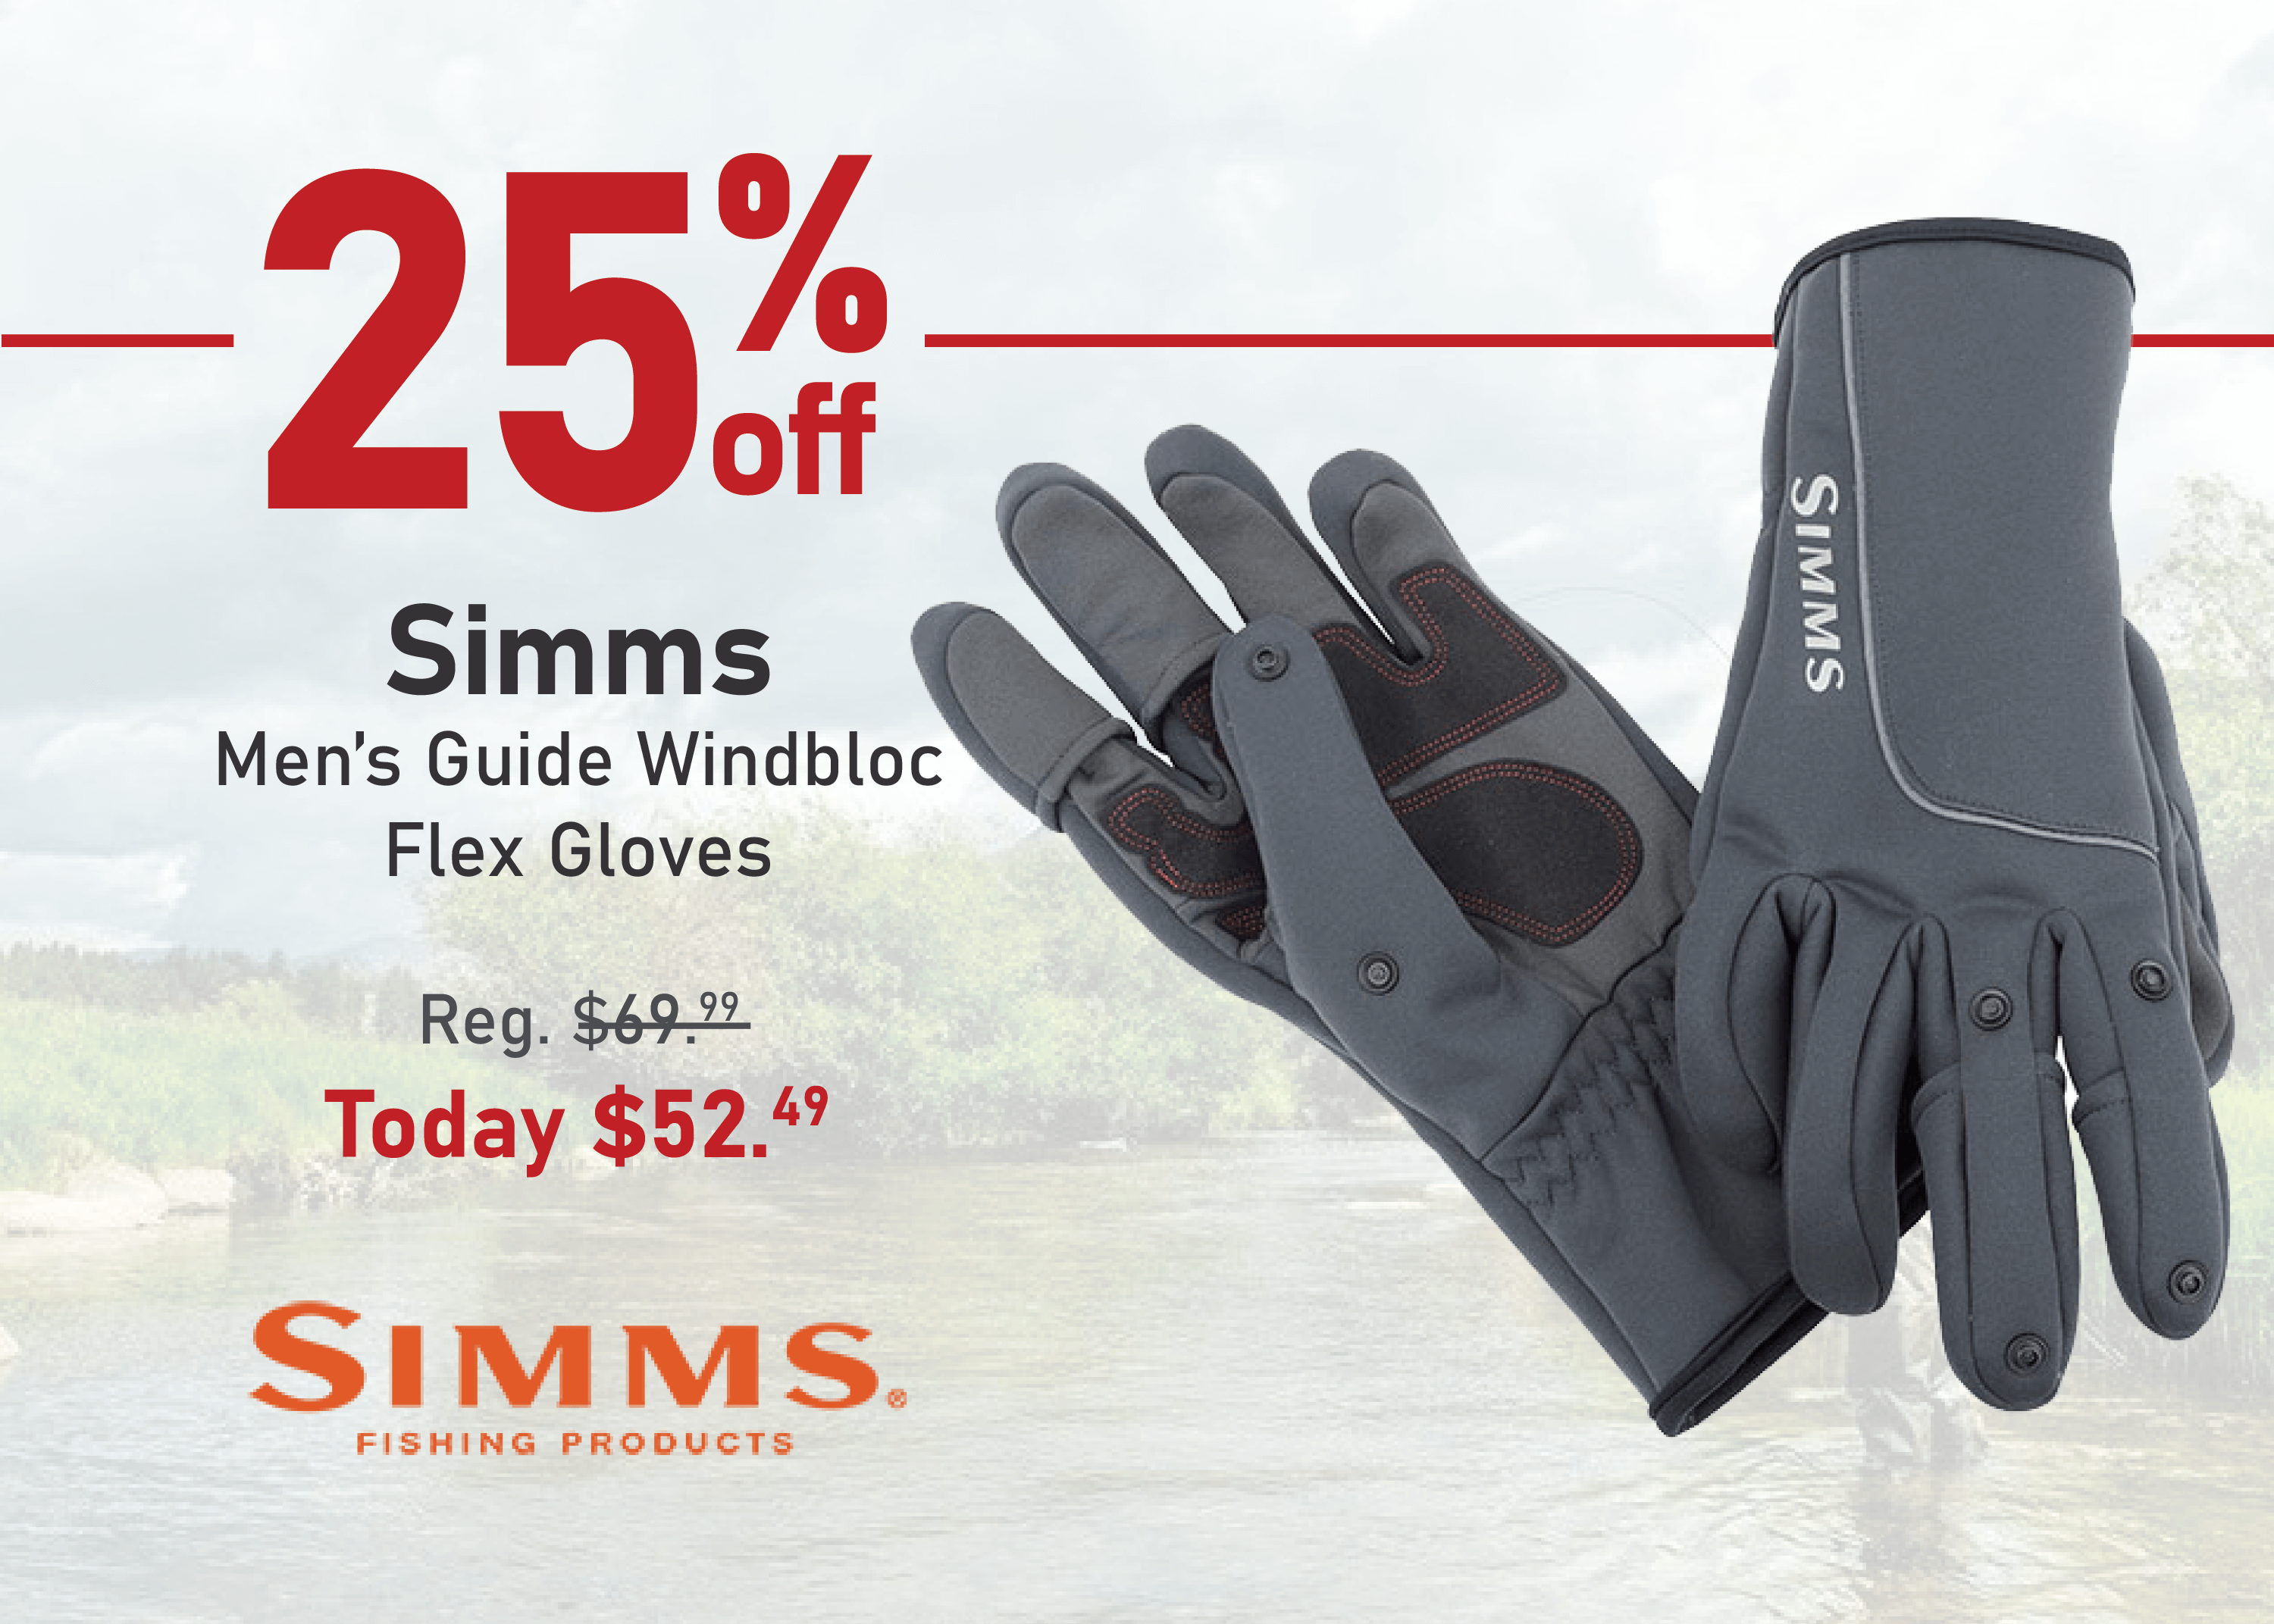 Save 25% on the Simms Men's Guide Windbloc Flex Gloves